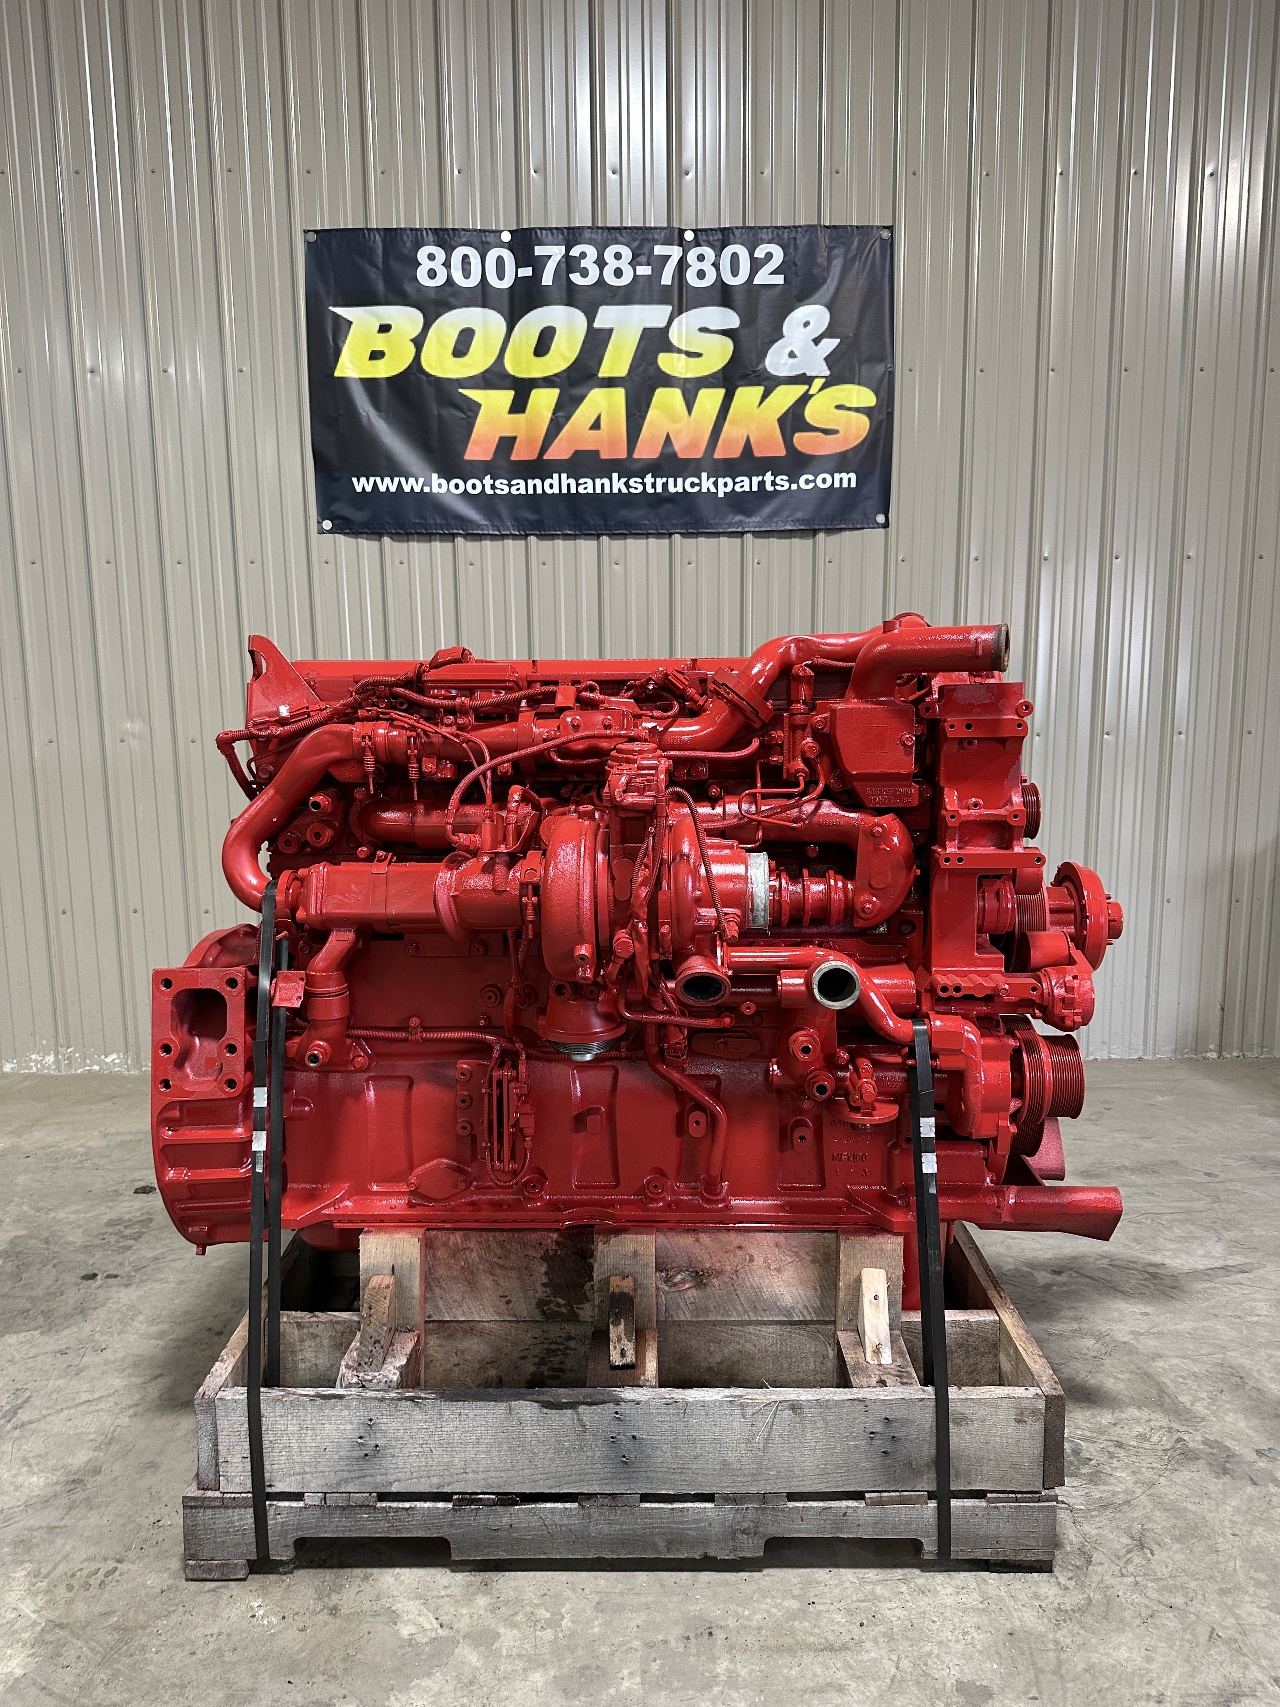 USED 2015 CUMMINS ISX15 COMPLETE ENGINE TRUCK PARTS #2007